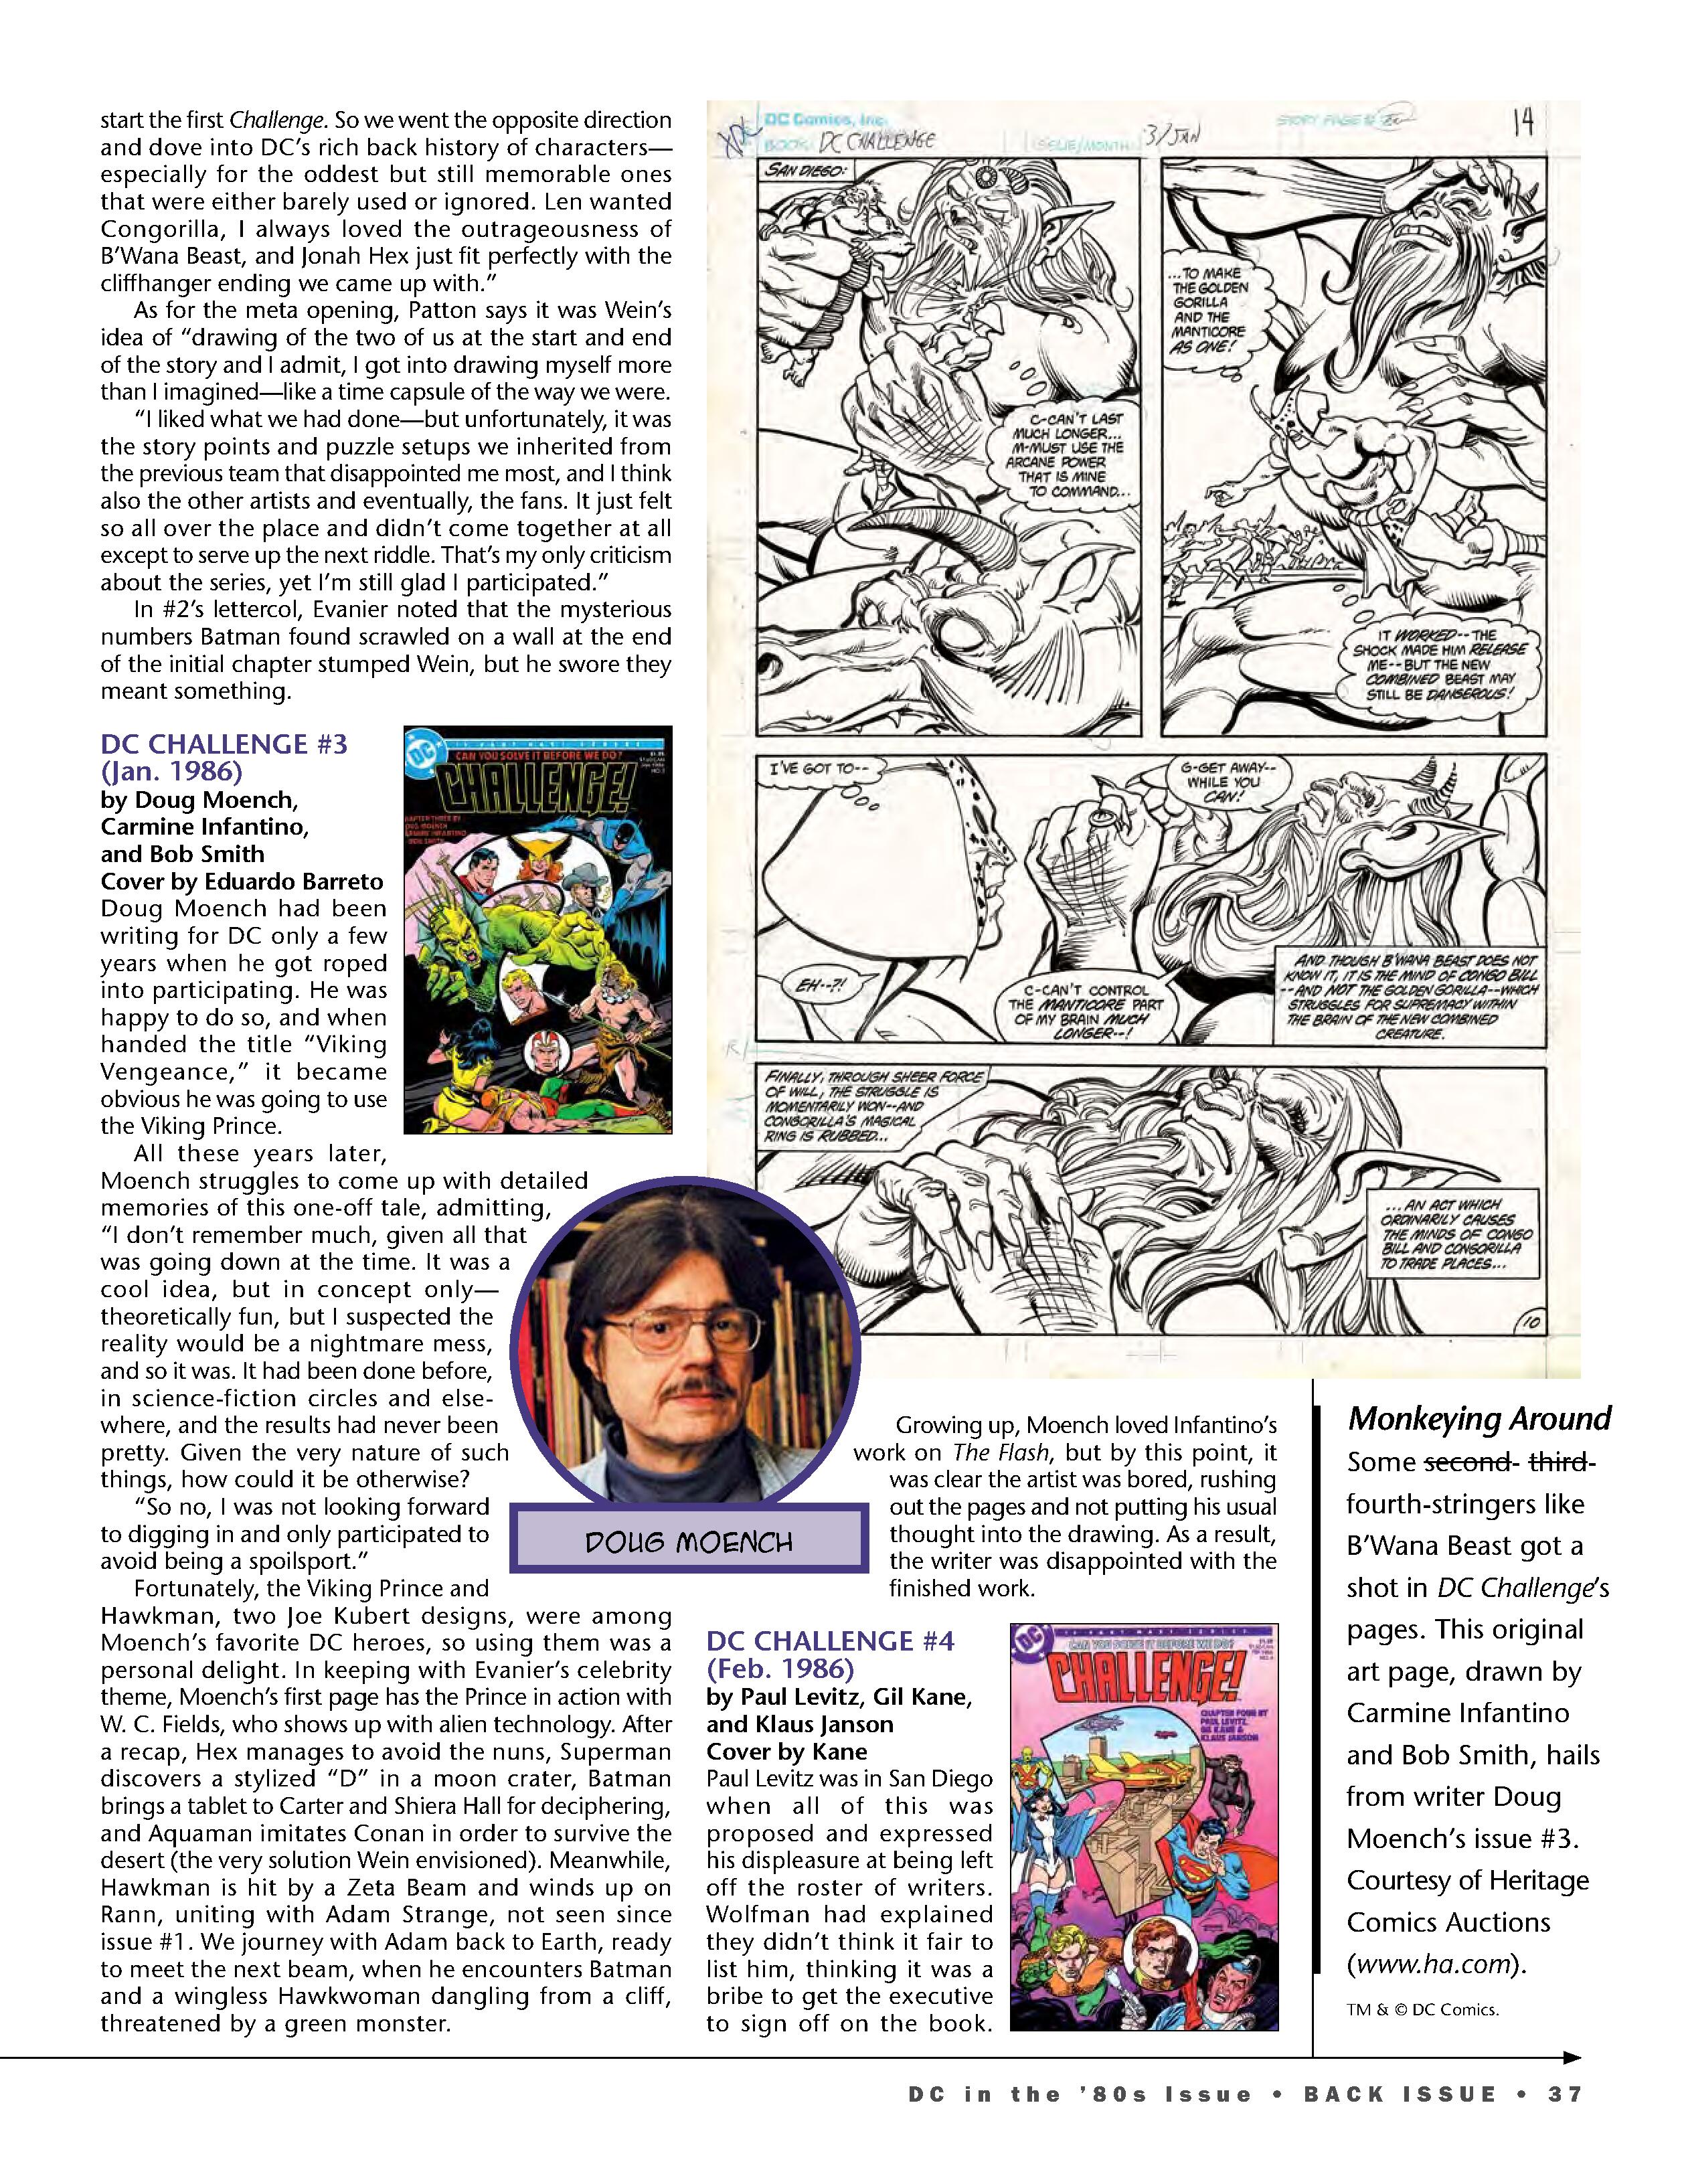 Read online Back Issue comic -  Issue #98 - 39